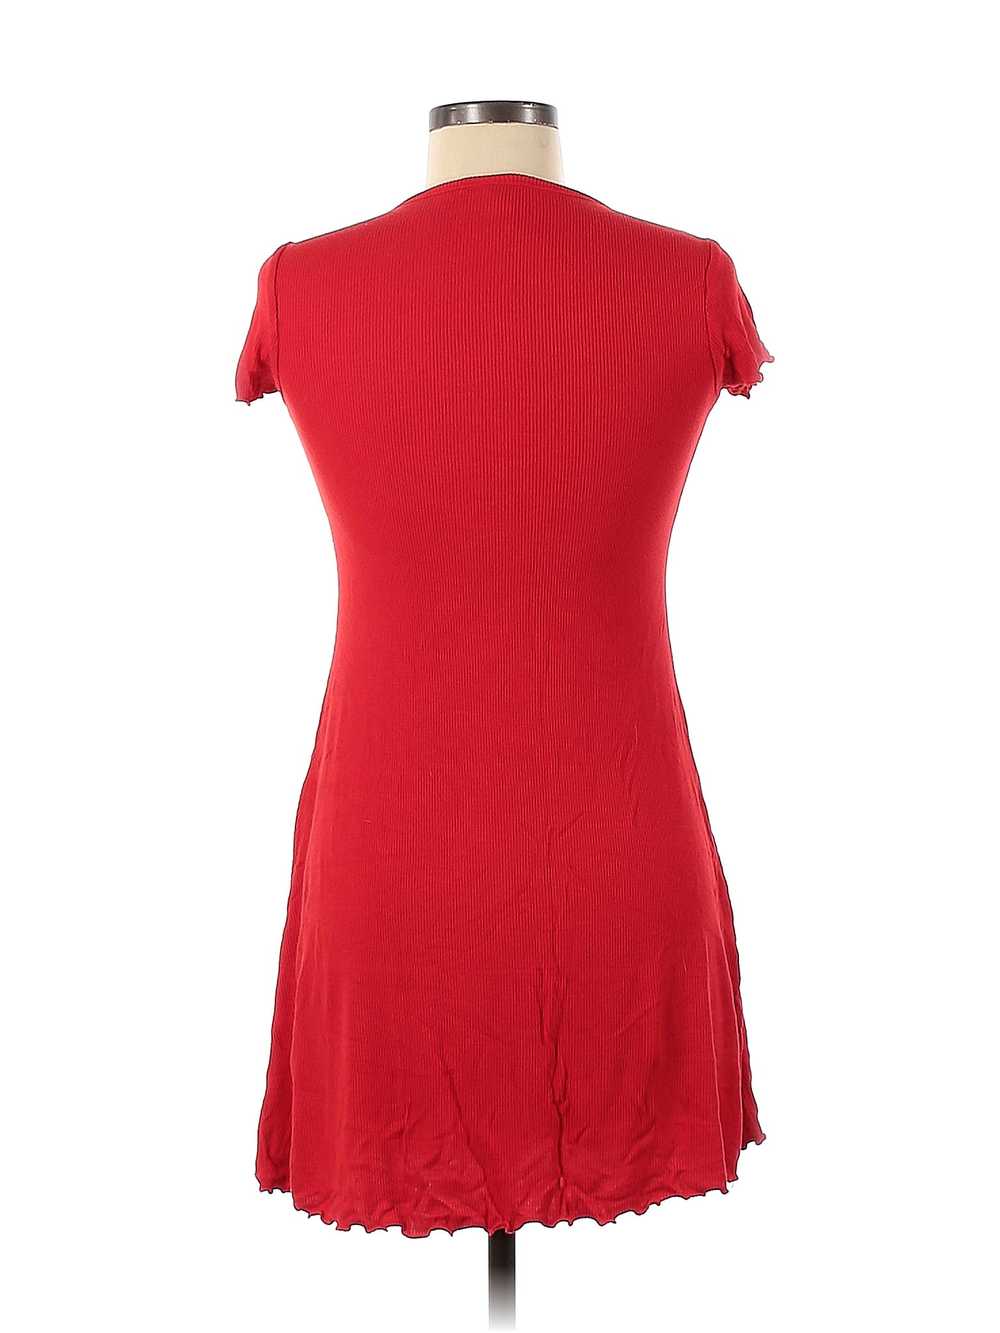 Mossimo Supply Co. Women Red Casual Dress XS - image 2